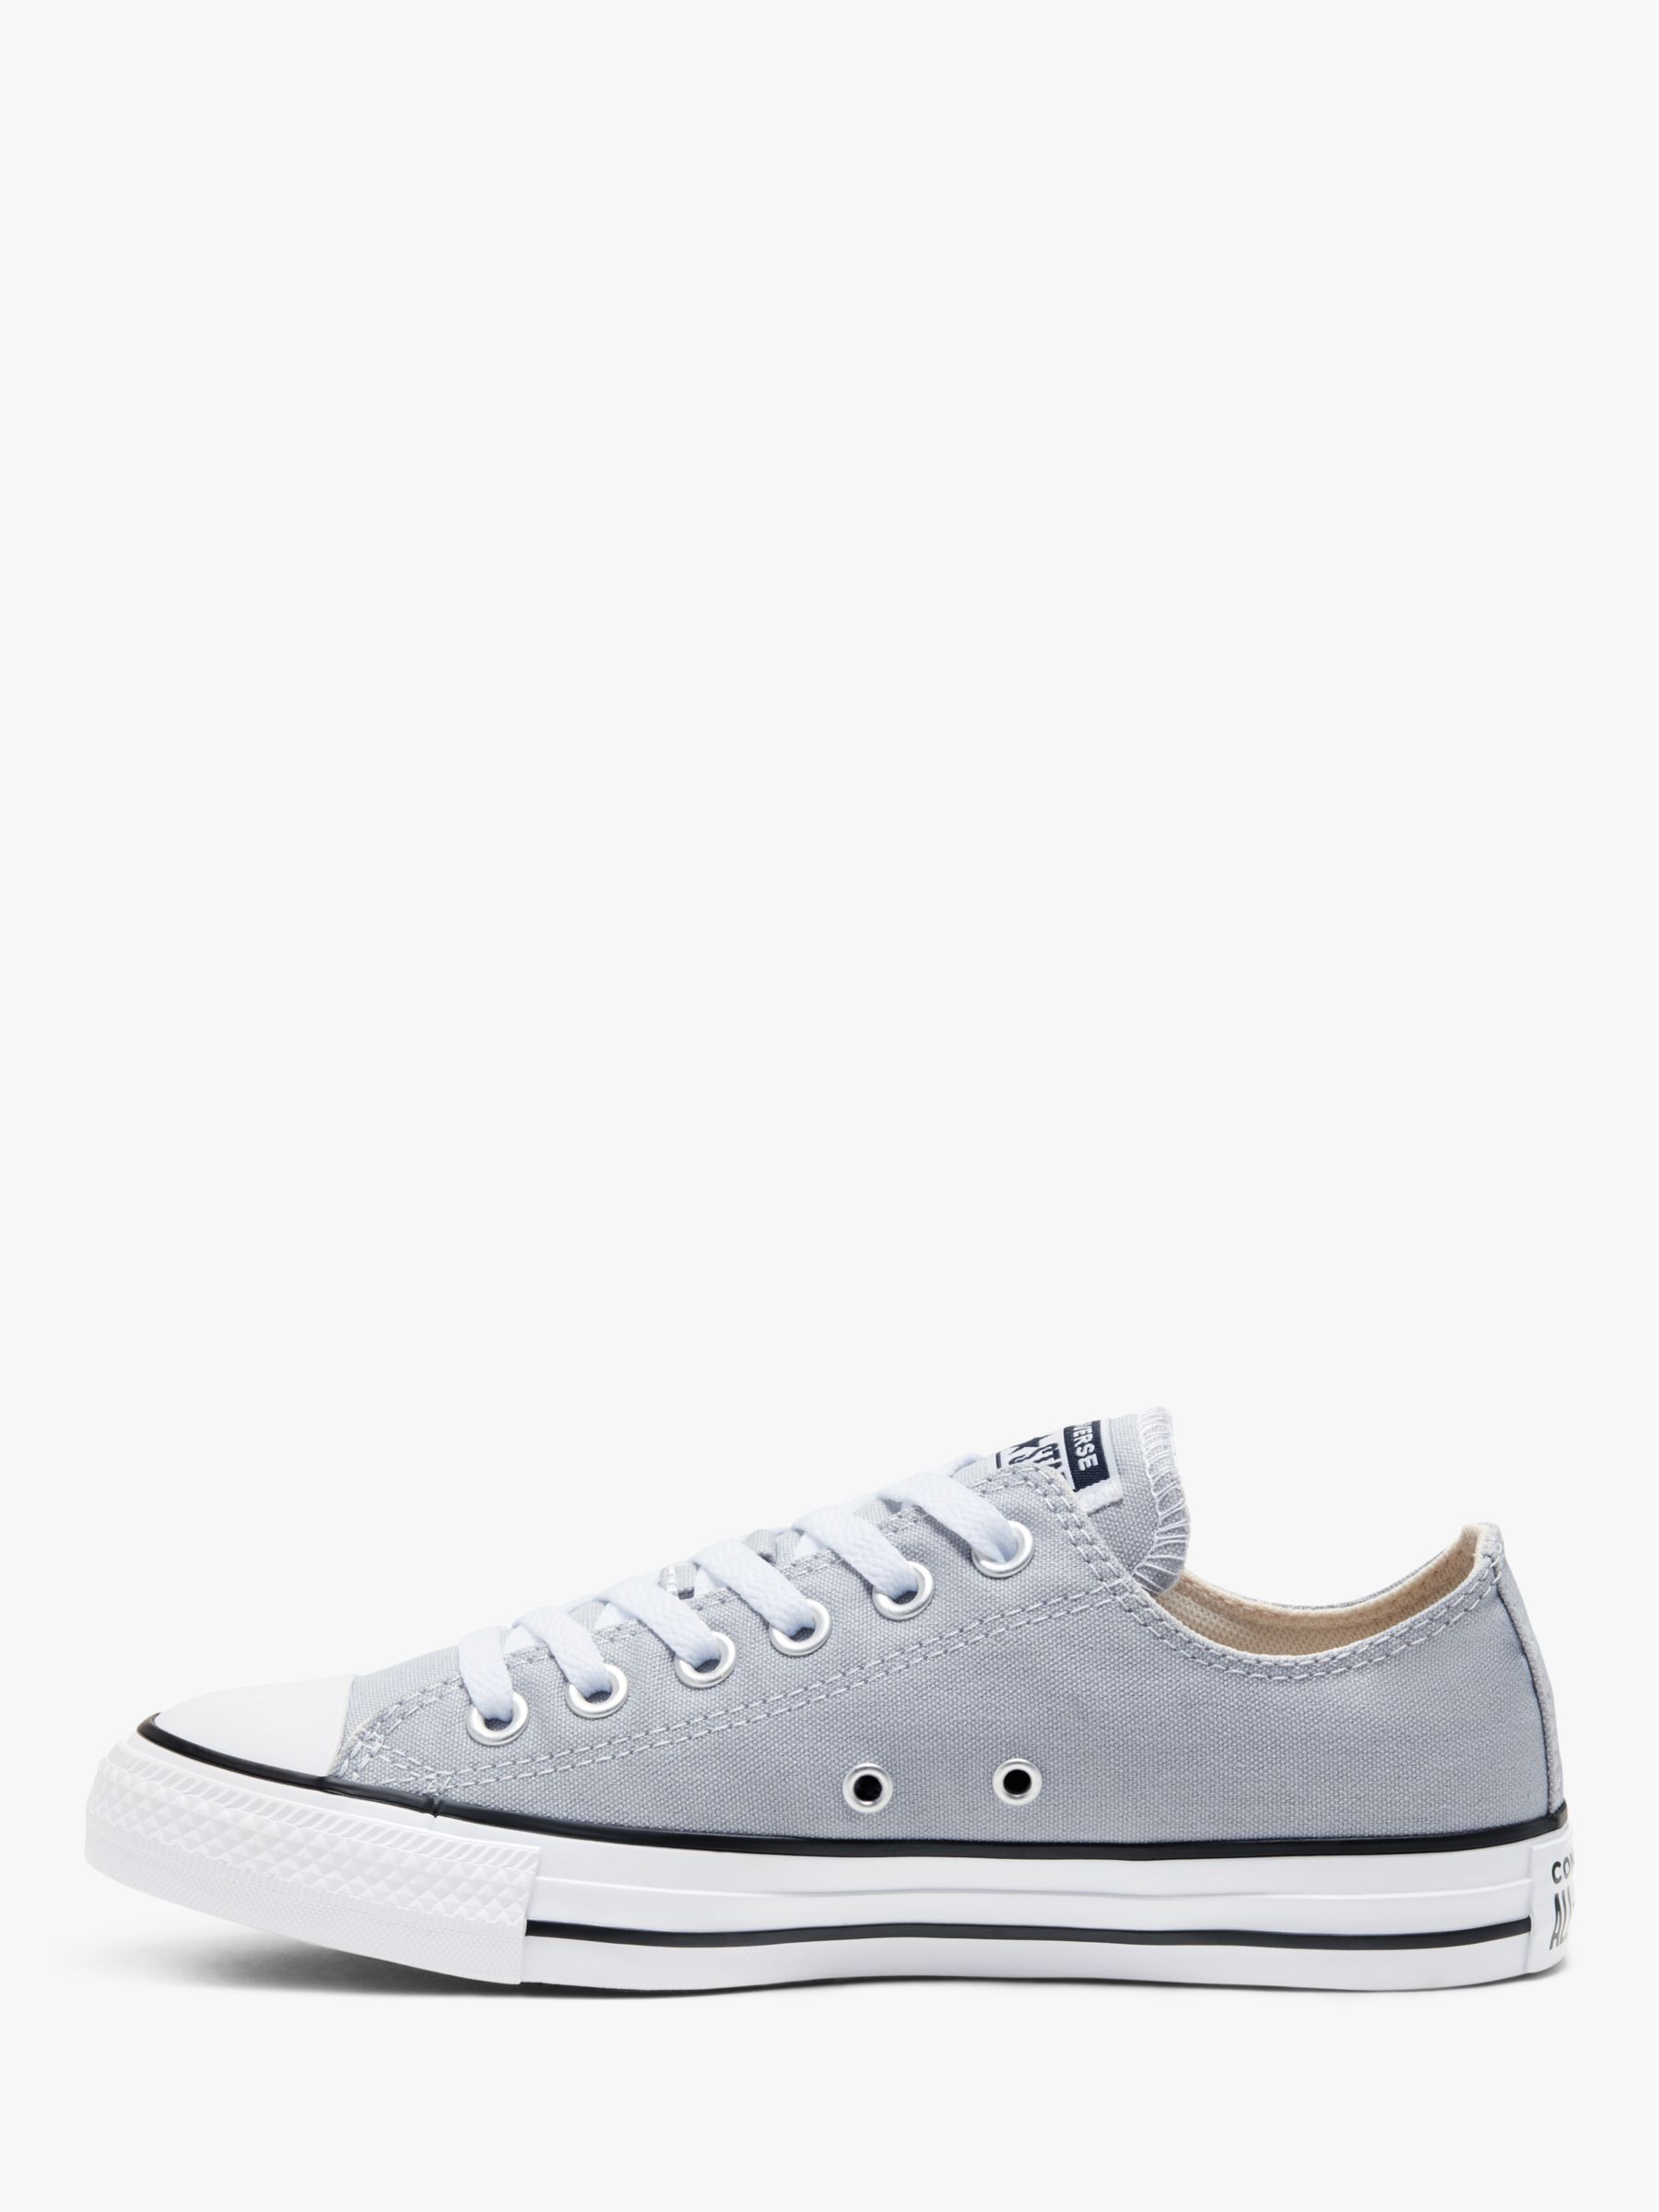 converse chuck taylor ox grey trainers